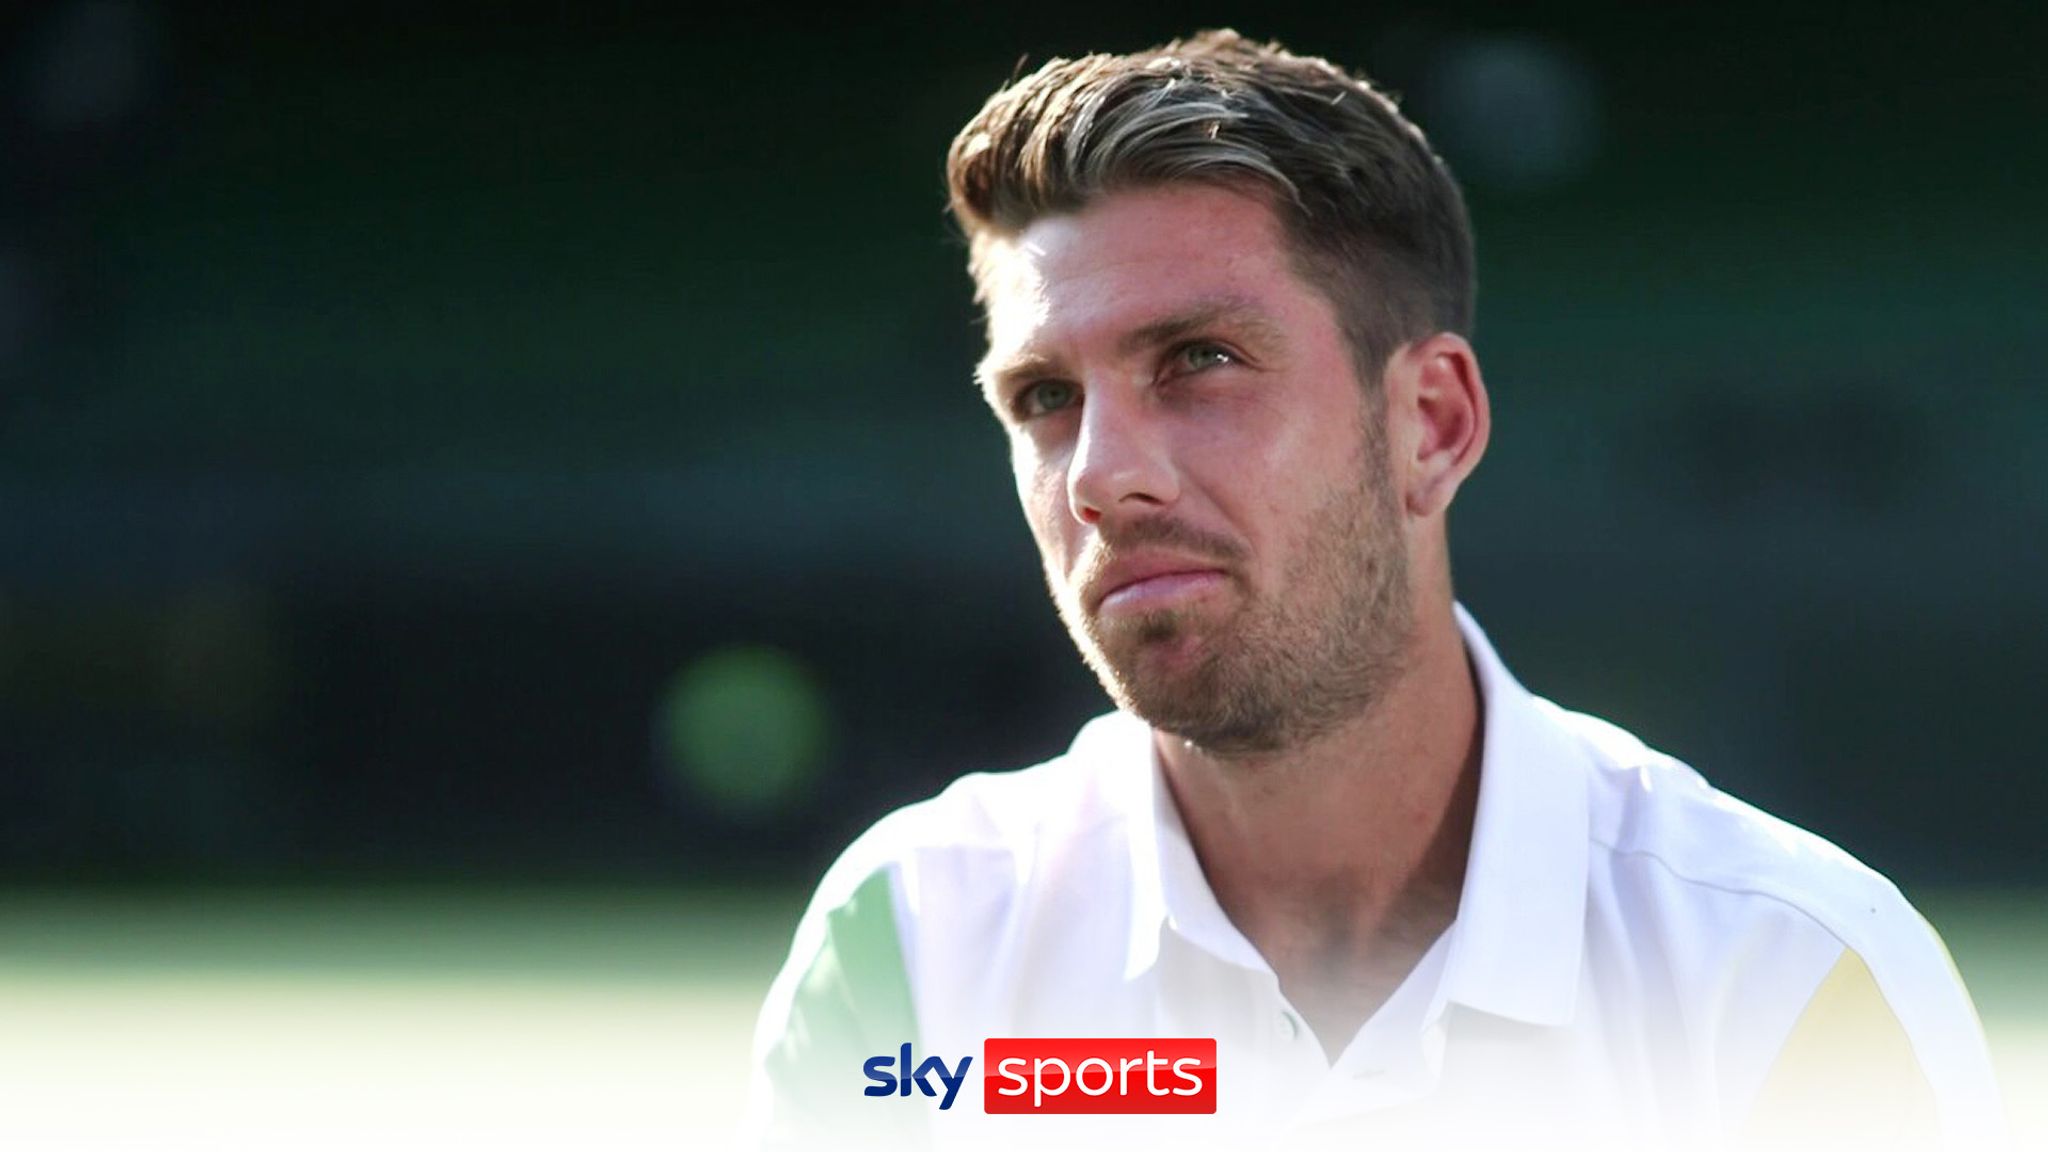 US Open Cameron Norrie is relishing chaotic Flushing Meadows ahead of first-round match Tennis News Sky Sports